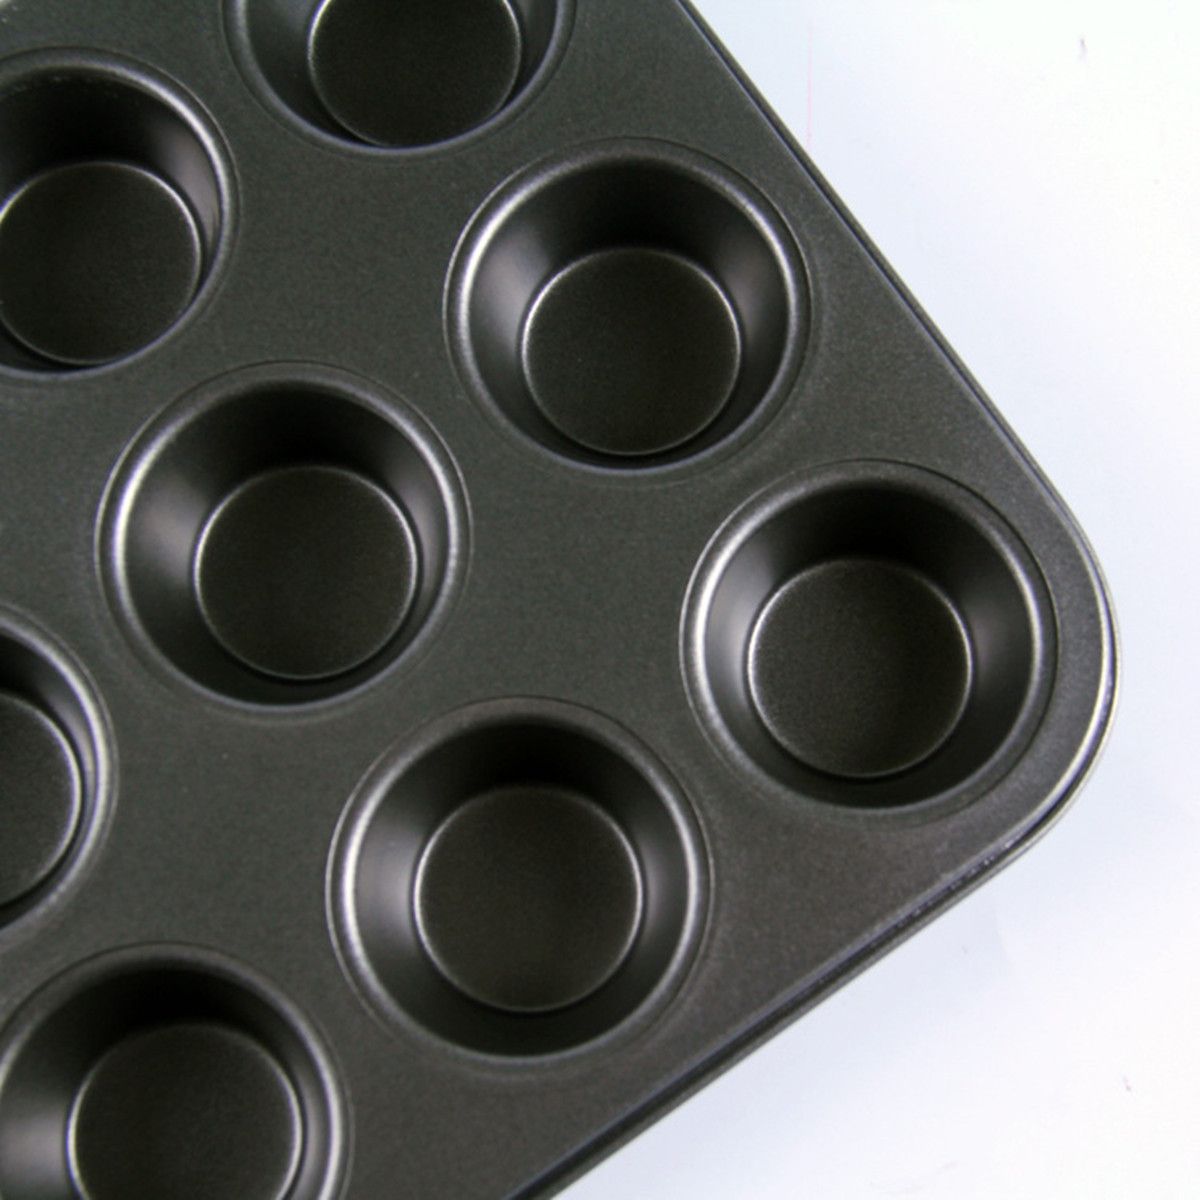 12-Grid-Cake-Mold-Pan-Muffin-Cupcake-Bakeware-Oven-Tray-Mould-1670917